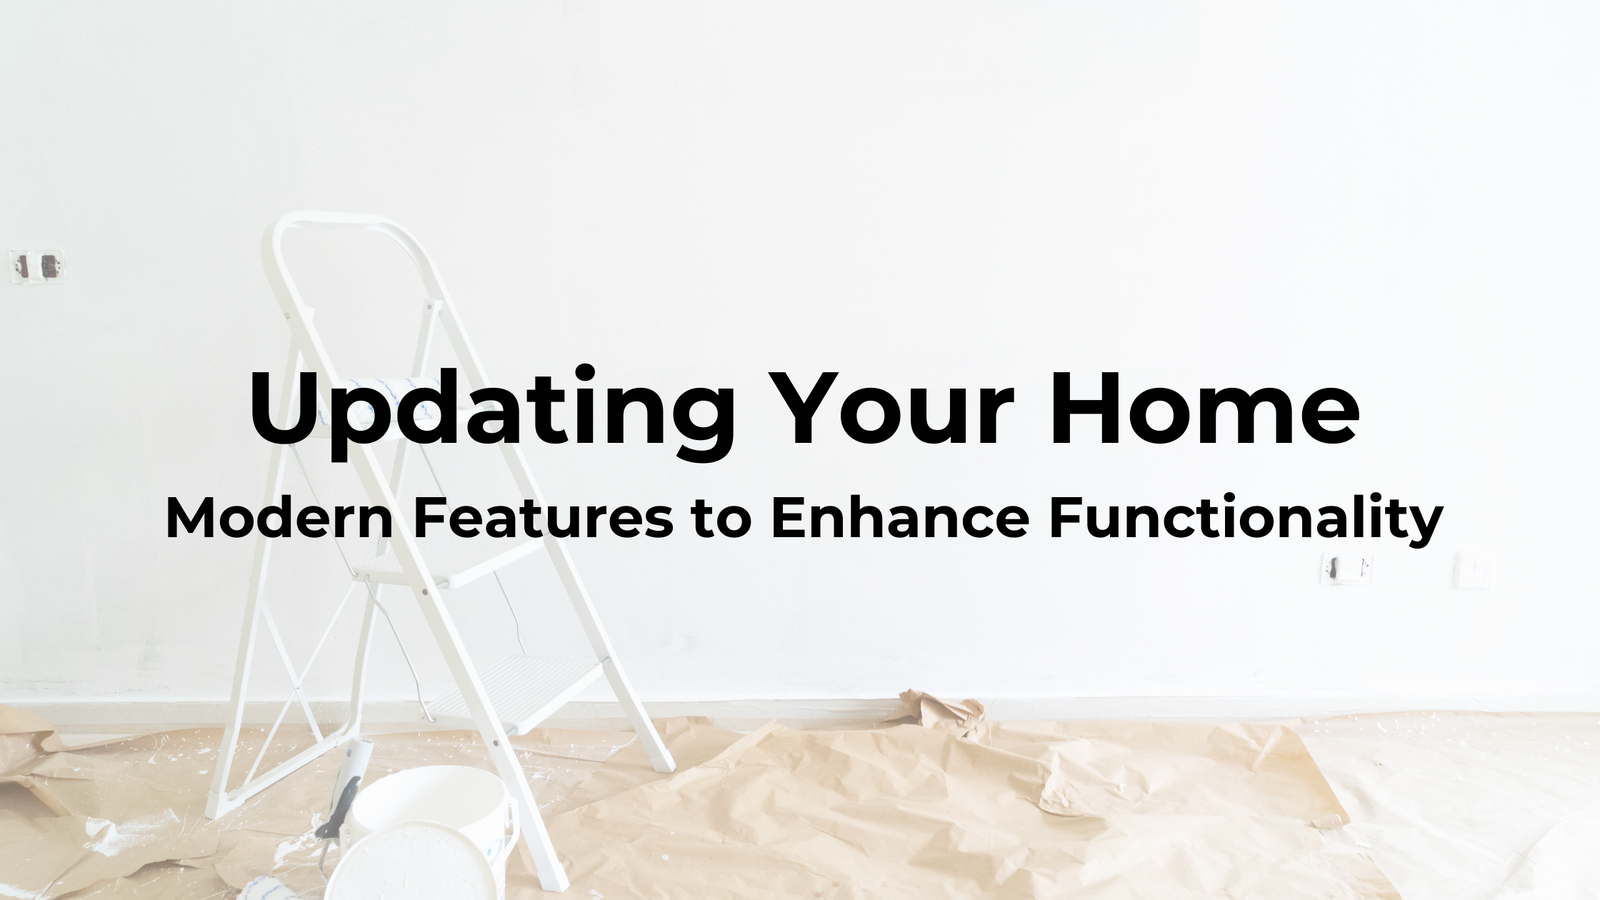 Modern Features to Enhance Functionality